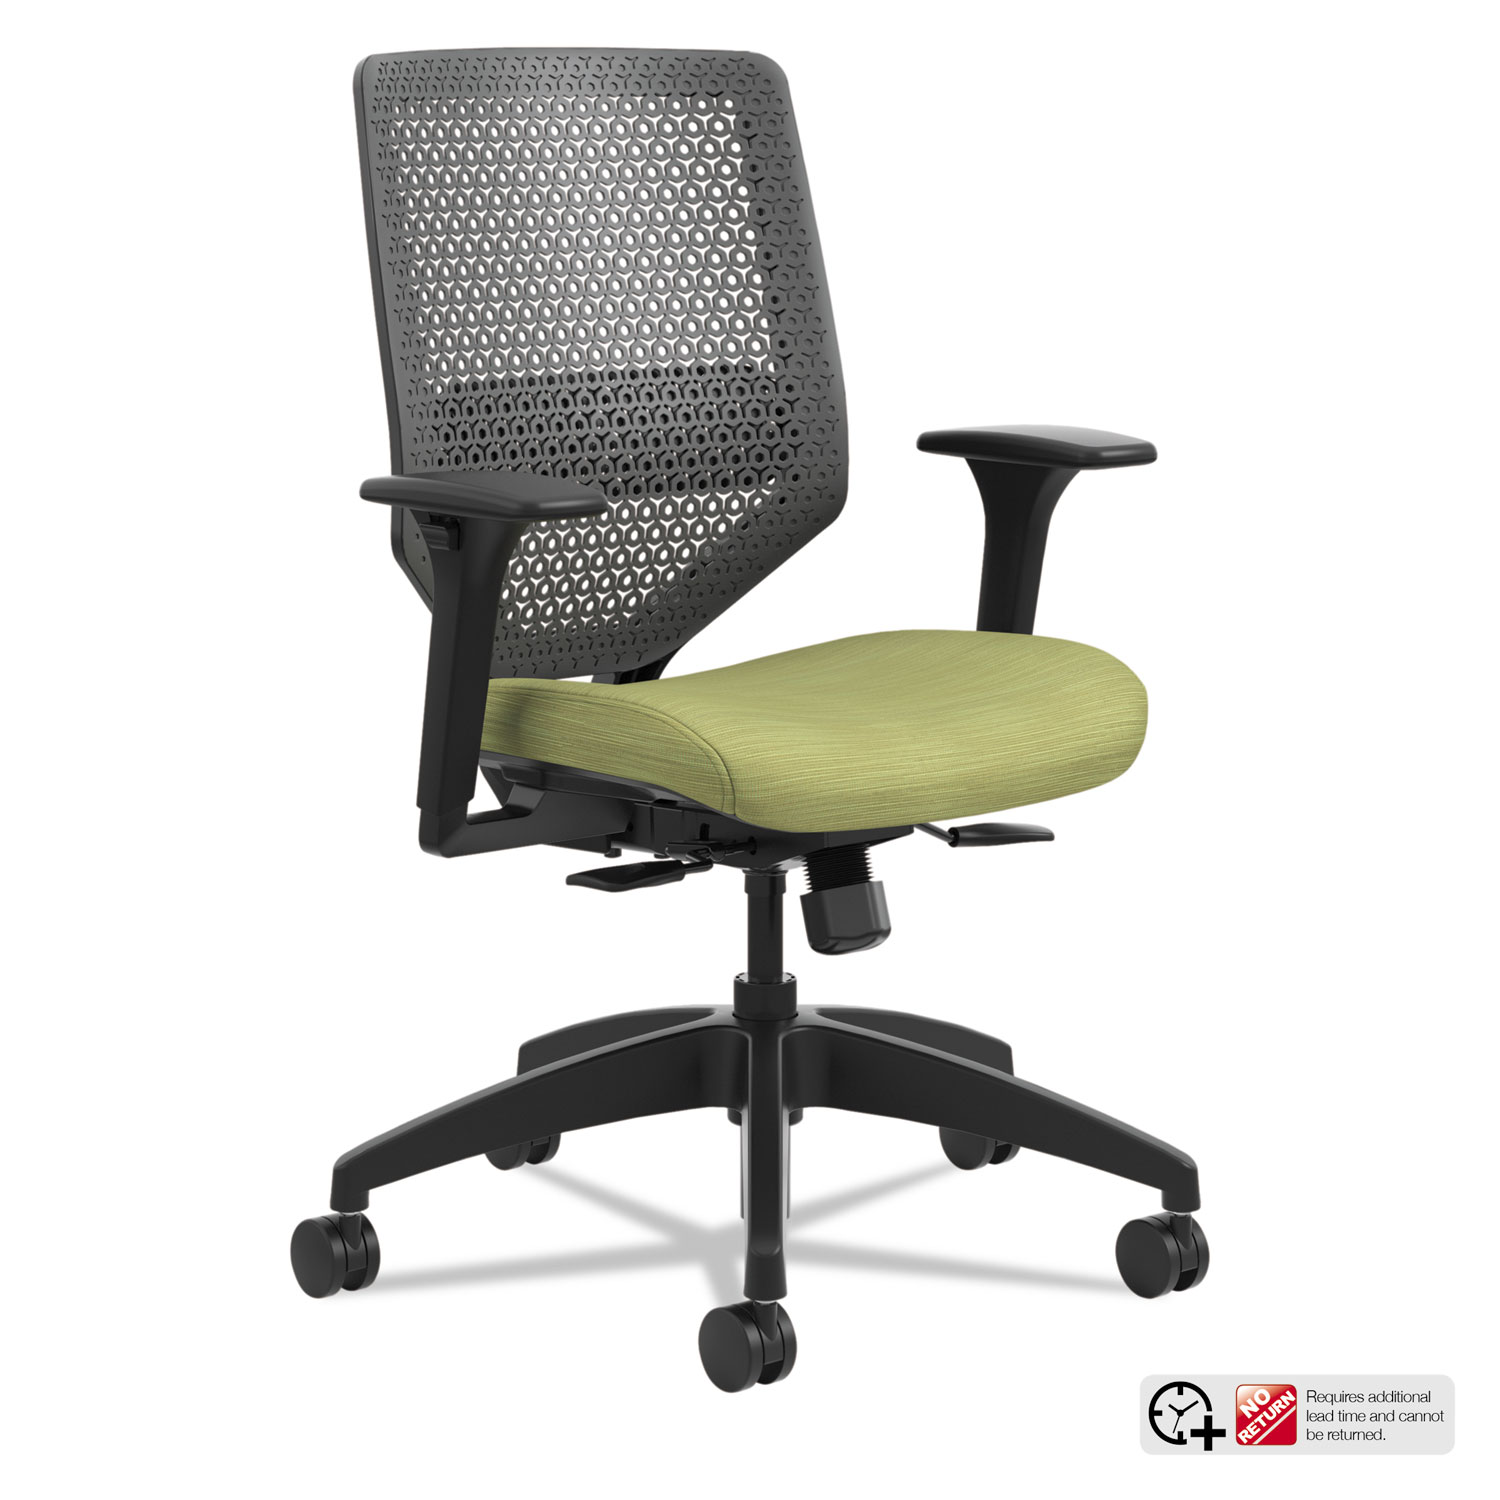  HON SVR1ACLC82TK Solve Series ReActiv Back Task Chair, Supports up to 300 lbs., Meadow Seat/Charcoal Back, Black Base (HONSVR1ACLC82TK) 